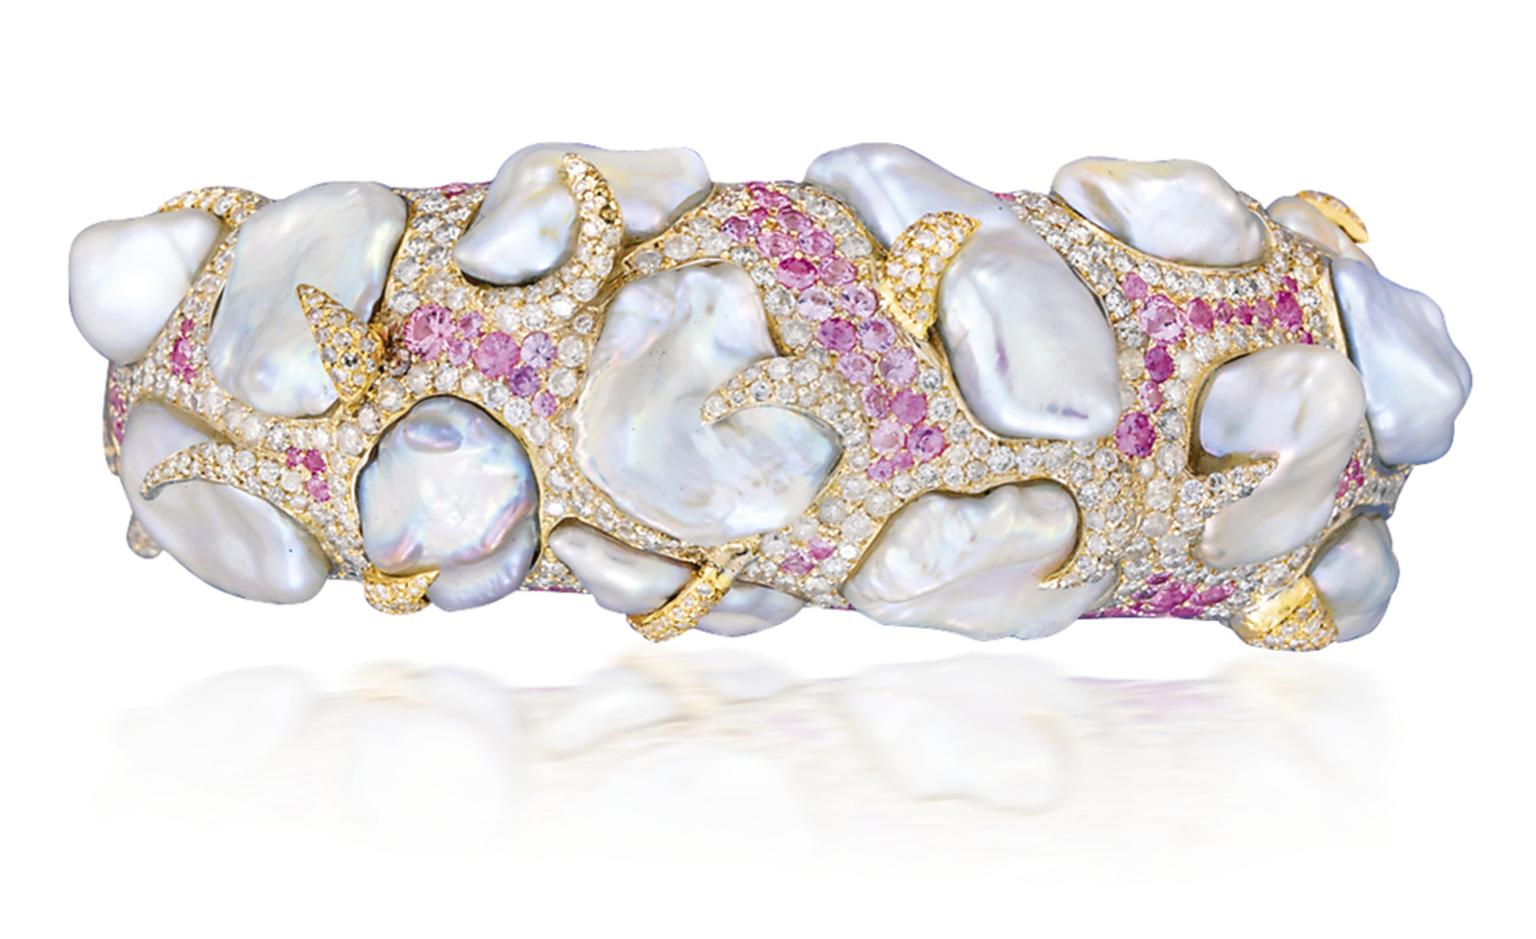 Lot 92. An attractive cultured pearl, coloured sapphire and diamond bangle, by Andre Marcha. Estimate 20,000 - 30,000 U.S. dollars